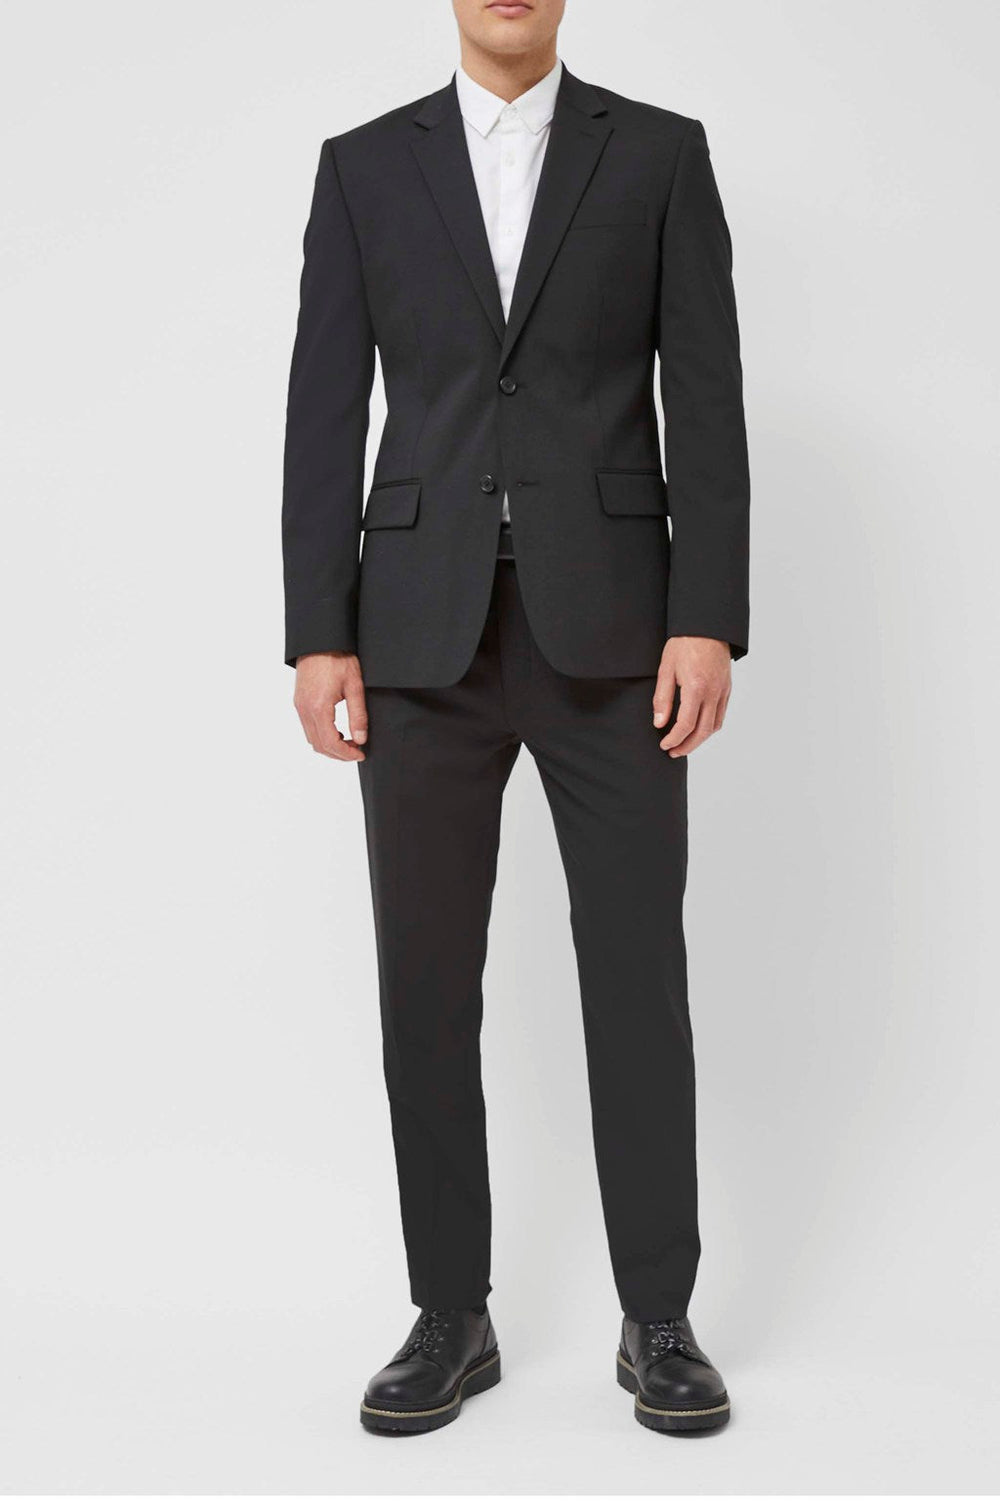 Classic Suiting Tailored Suit Jacket | French Connection UK